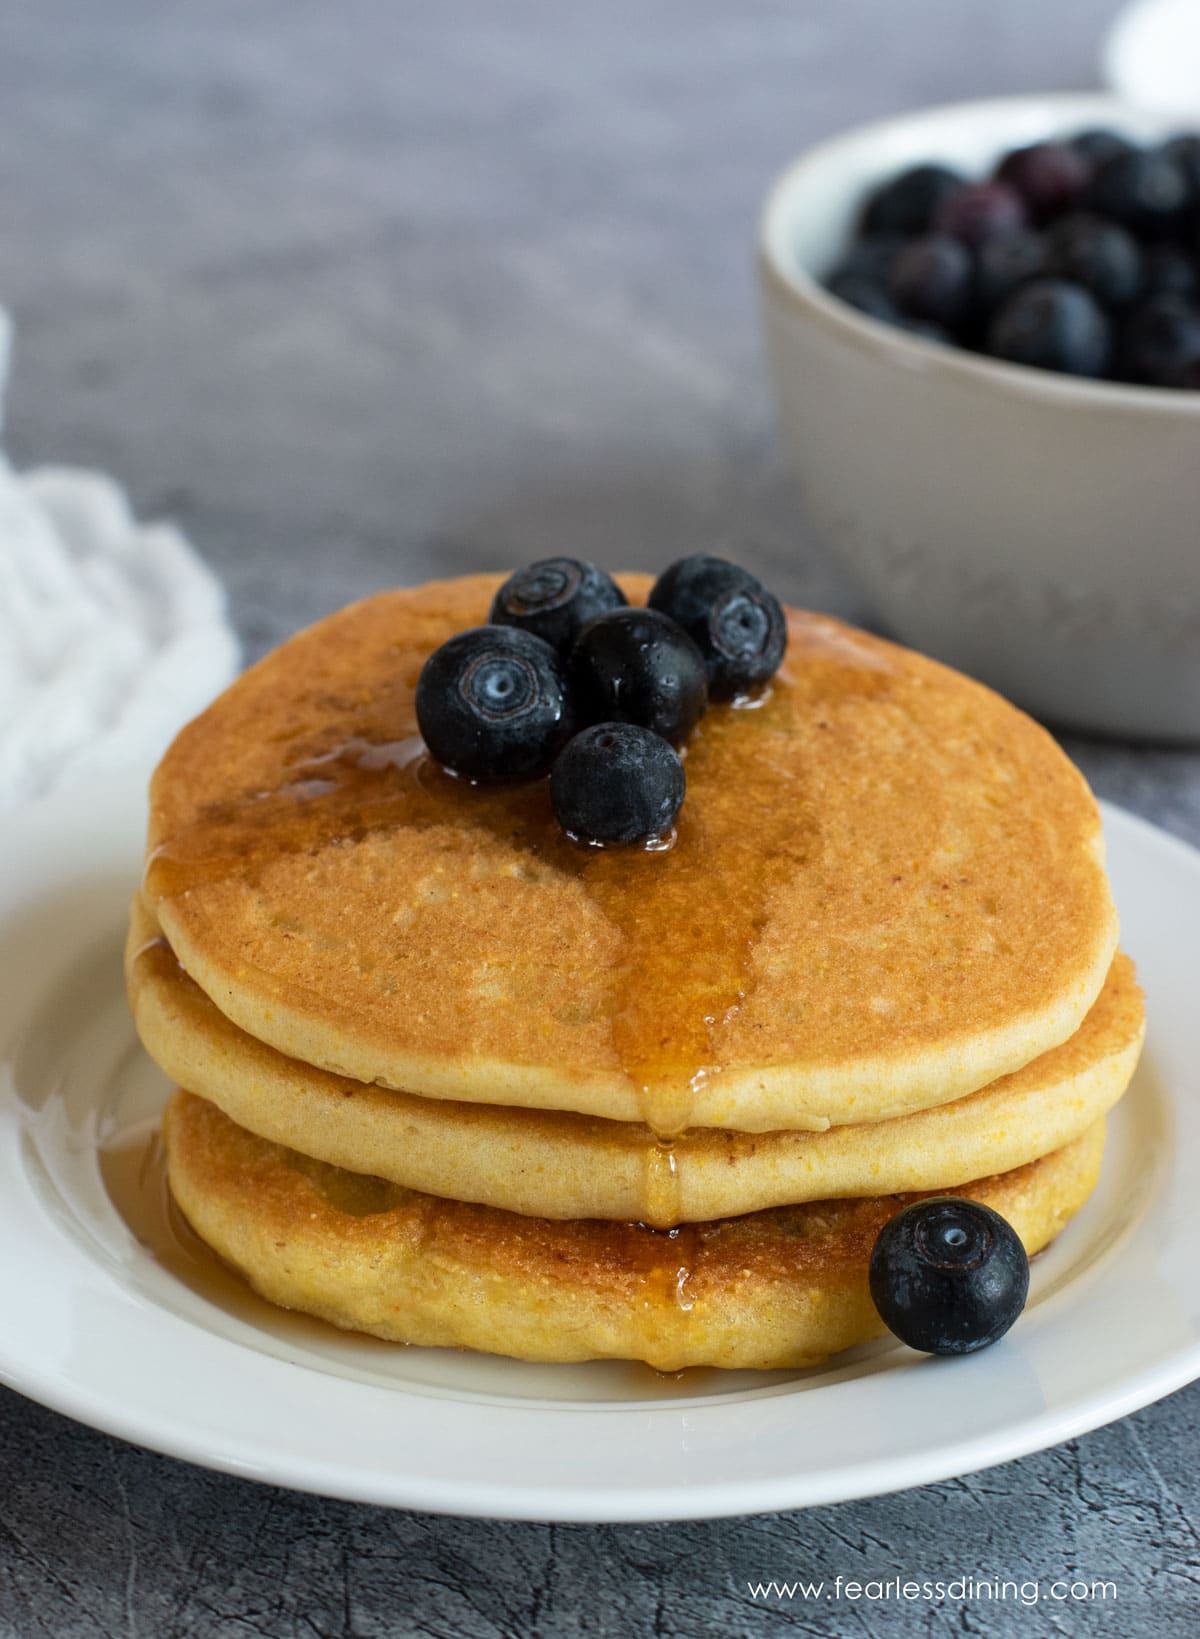 gluten free pancakes recipes round up by eatingworks.